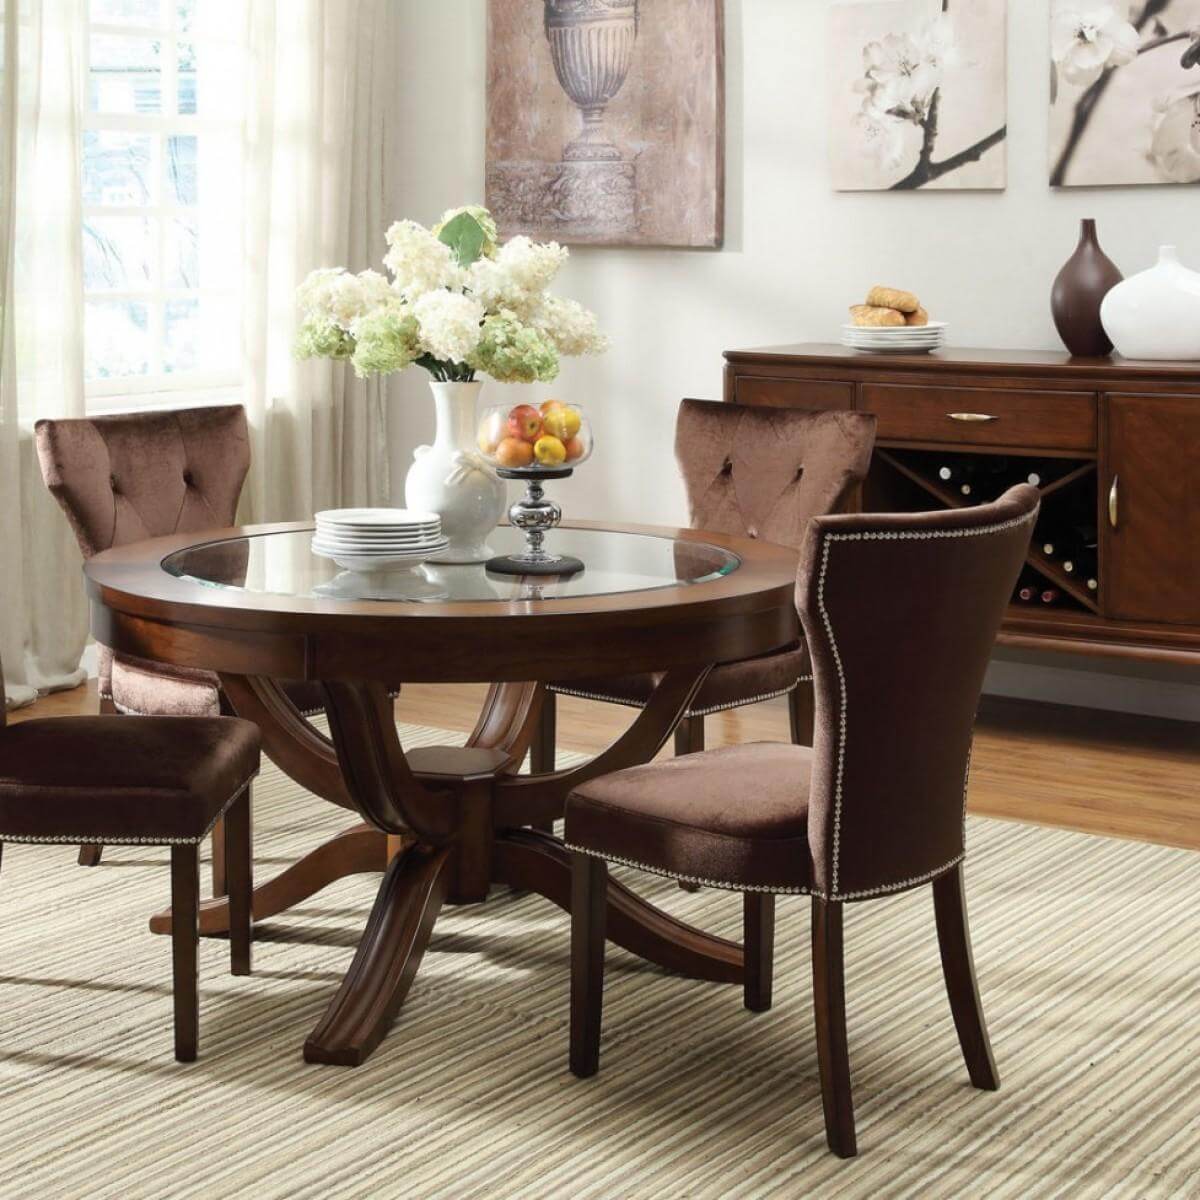 Top 9 Most Easiest and Coolest Round Dining Table Design Ideas